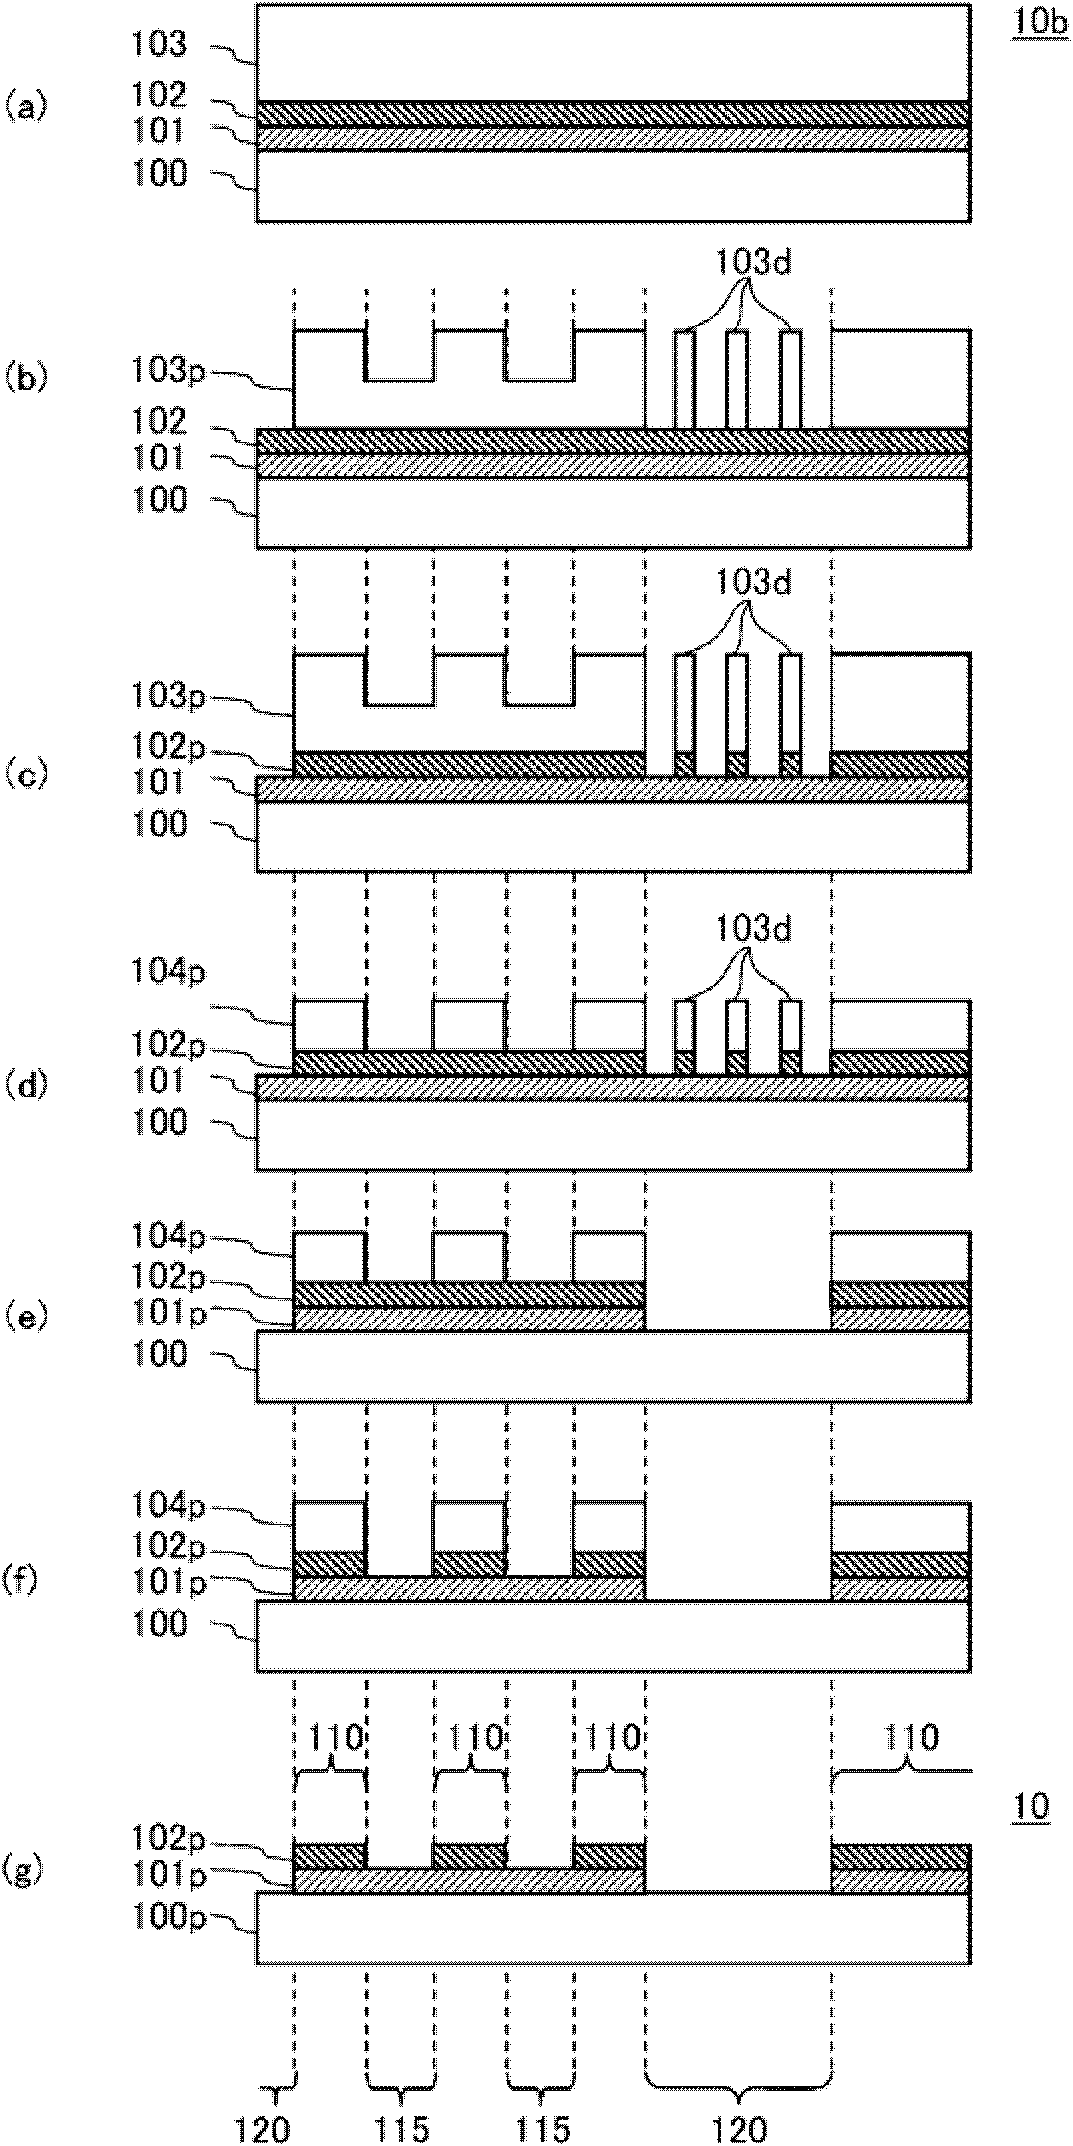 Manufacturing Method Of Multicolor Dimming Masking And Pattern Transfer Printing Method